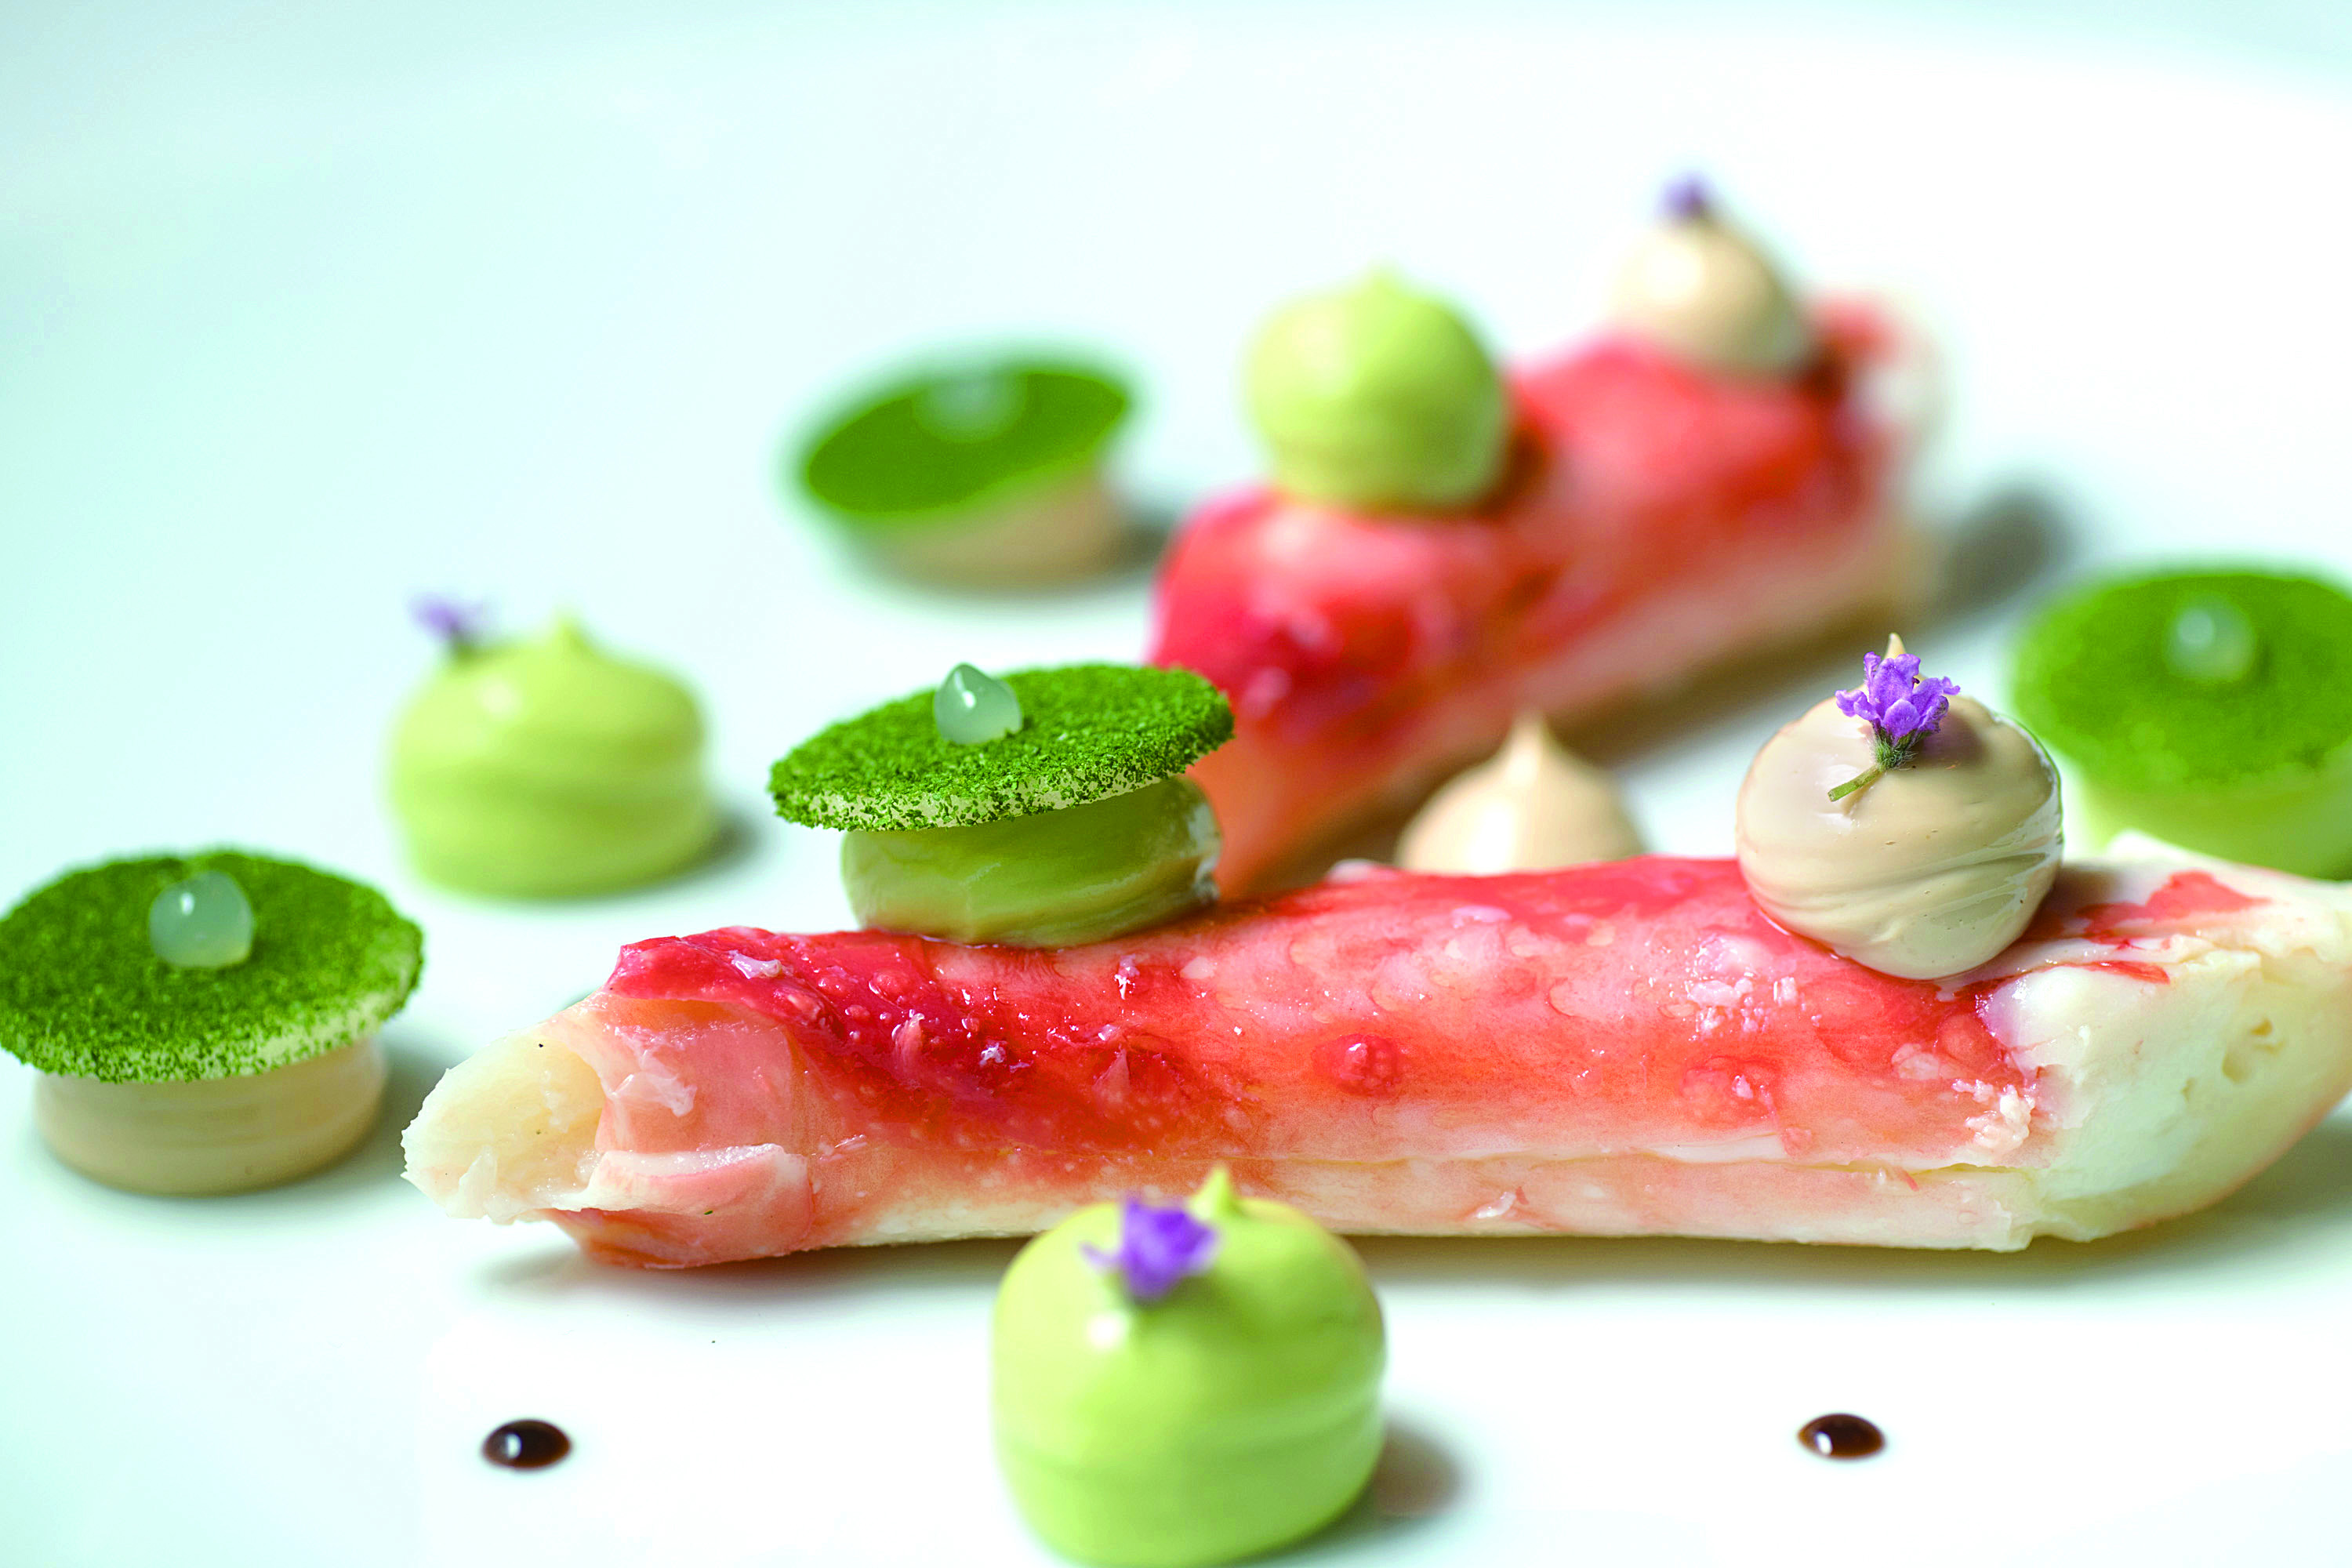 Royal King Crab from North Sea Marinated with Bergamot Lemon, Coffee Mayonnaise and Condiments <br/>北海皇帝蟹配佛手柑和咖啡蛋黃醬